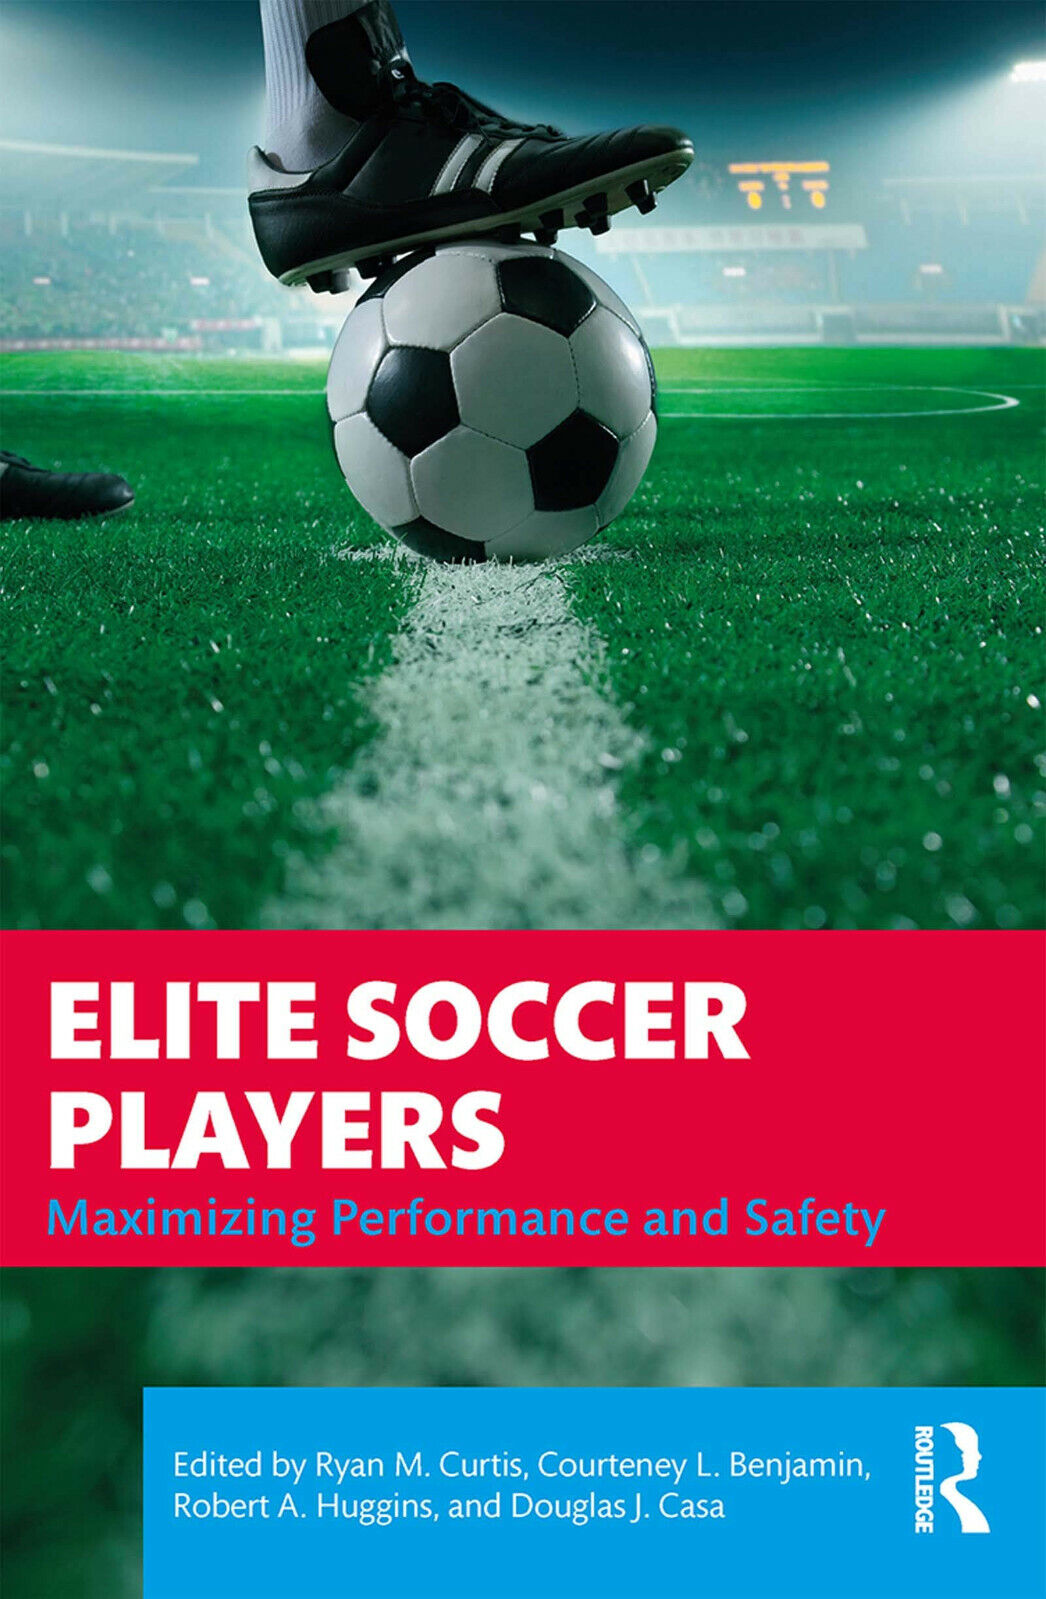 Elite Soccer Players - Ryan Curtis - Routledge, 2019